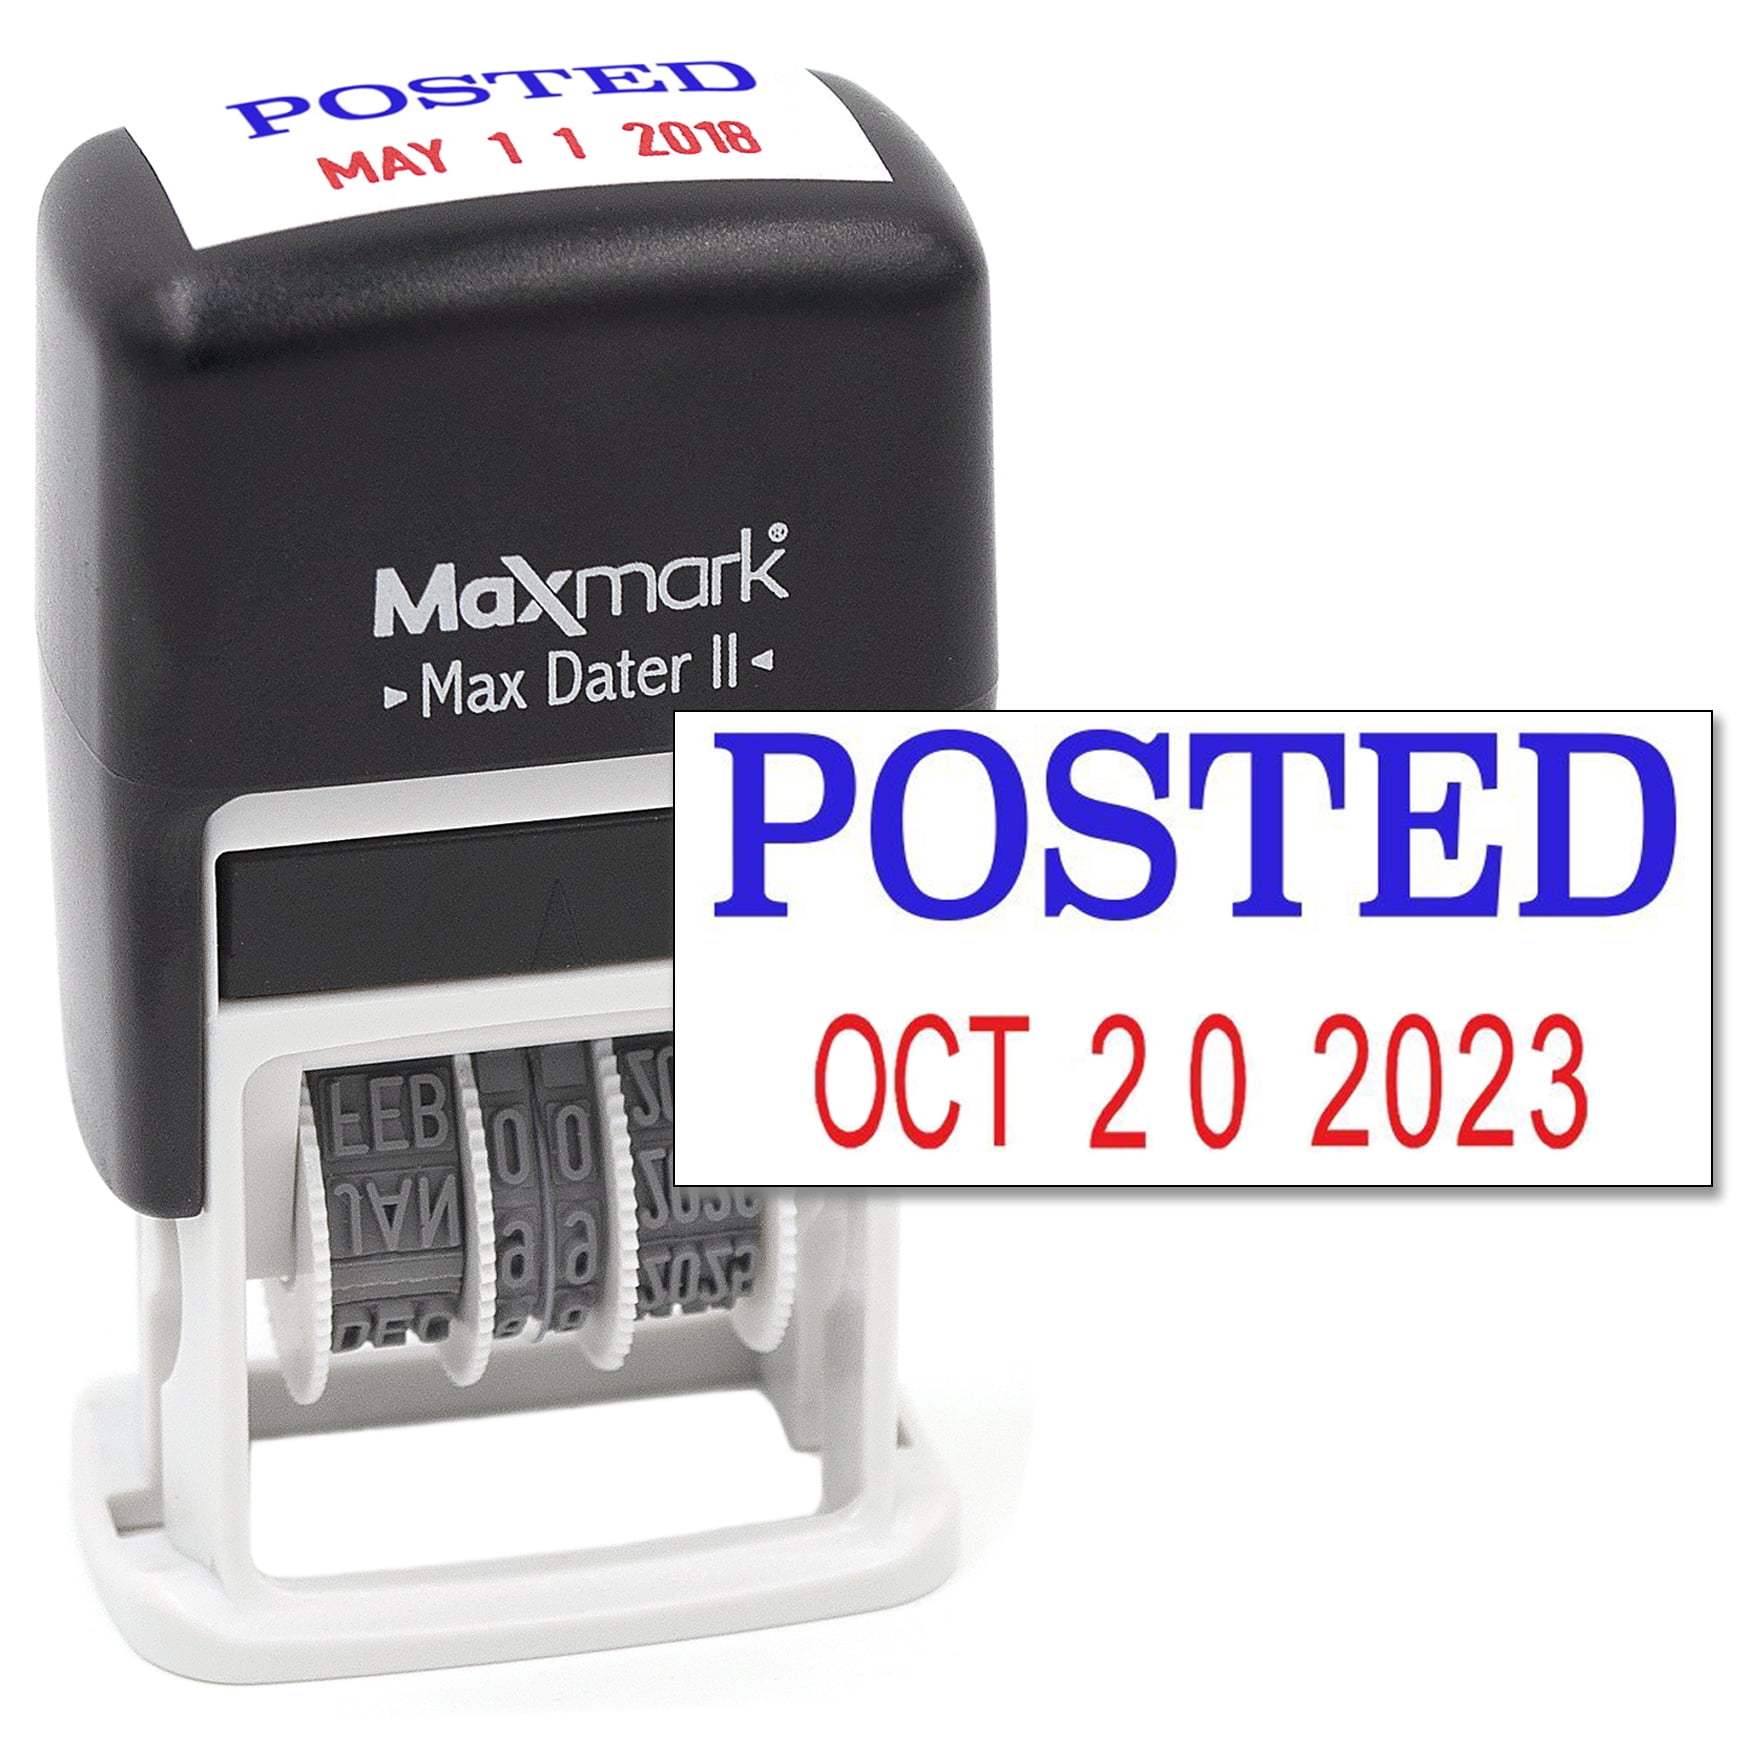 Red Ink E-5217 ATTACHMENT Office Self Inking Rubber Stamp 